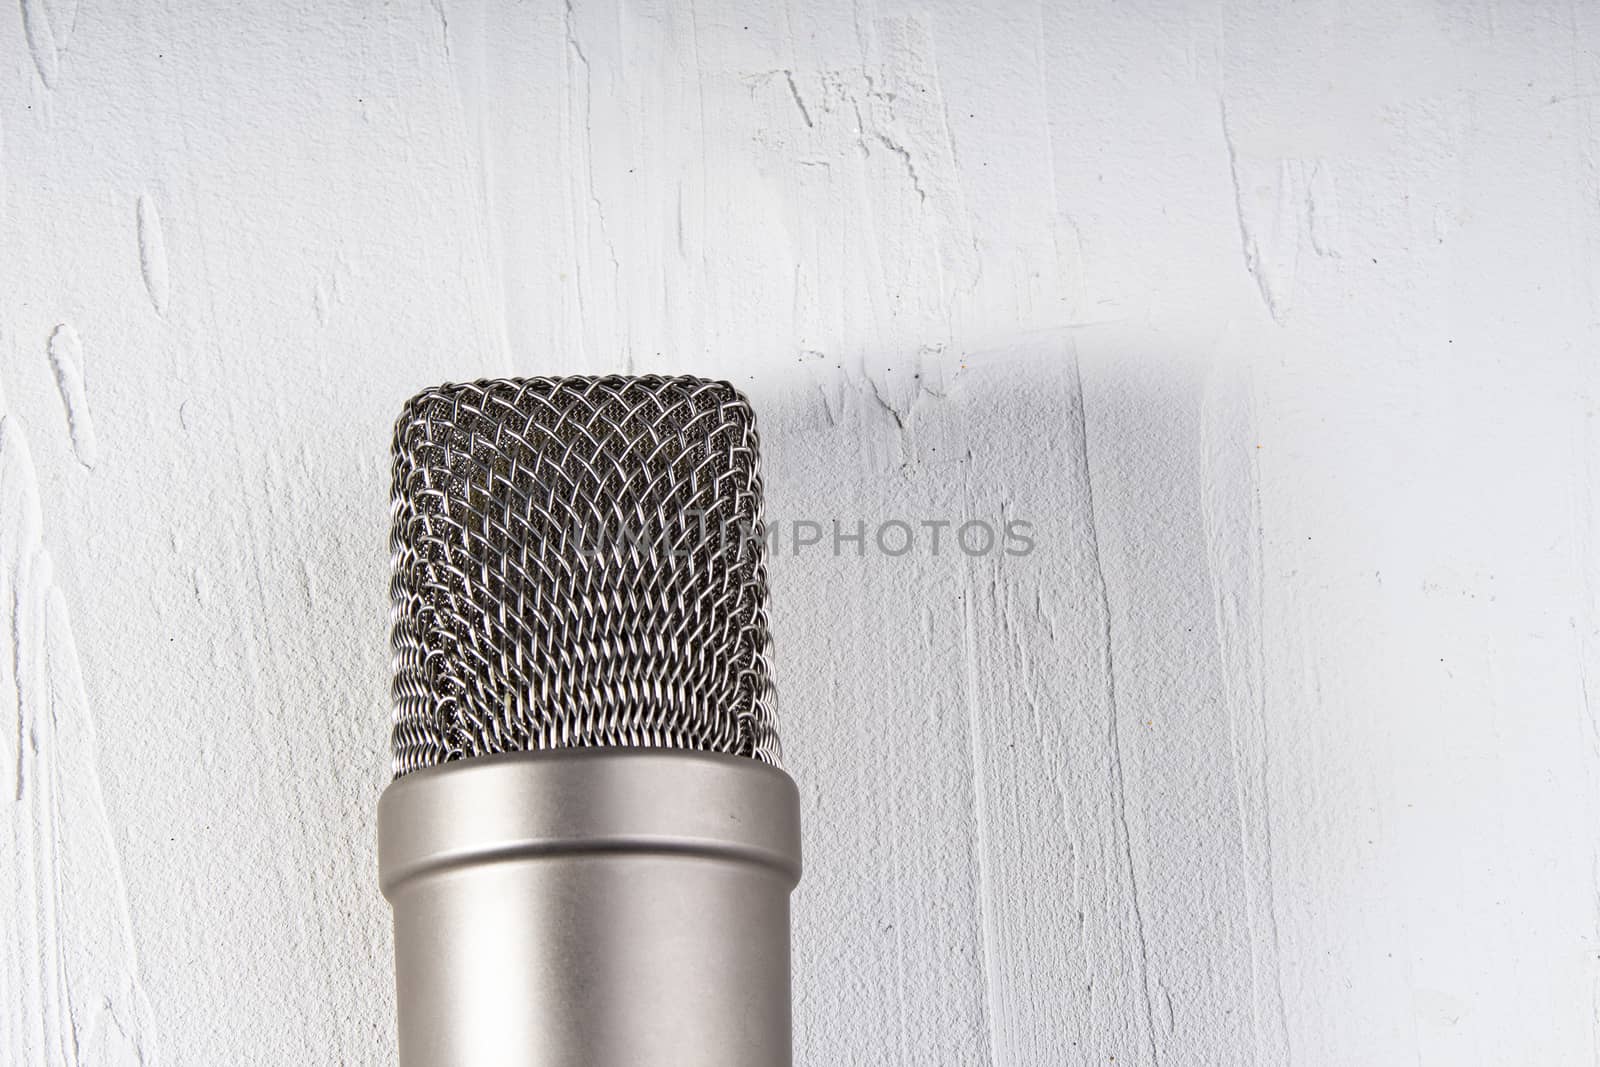 Microphone on lay on a texture background with a light by oasisamuel